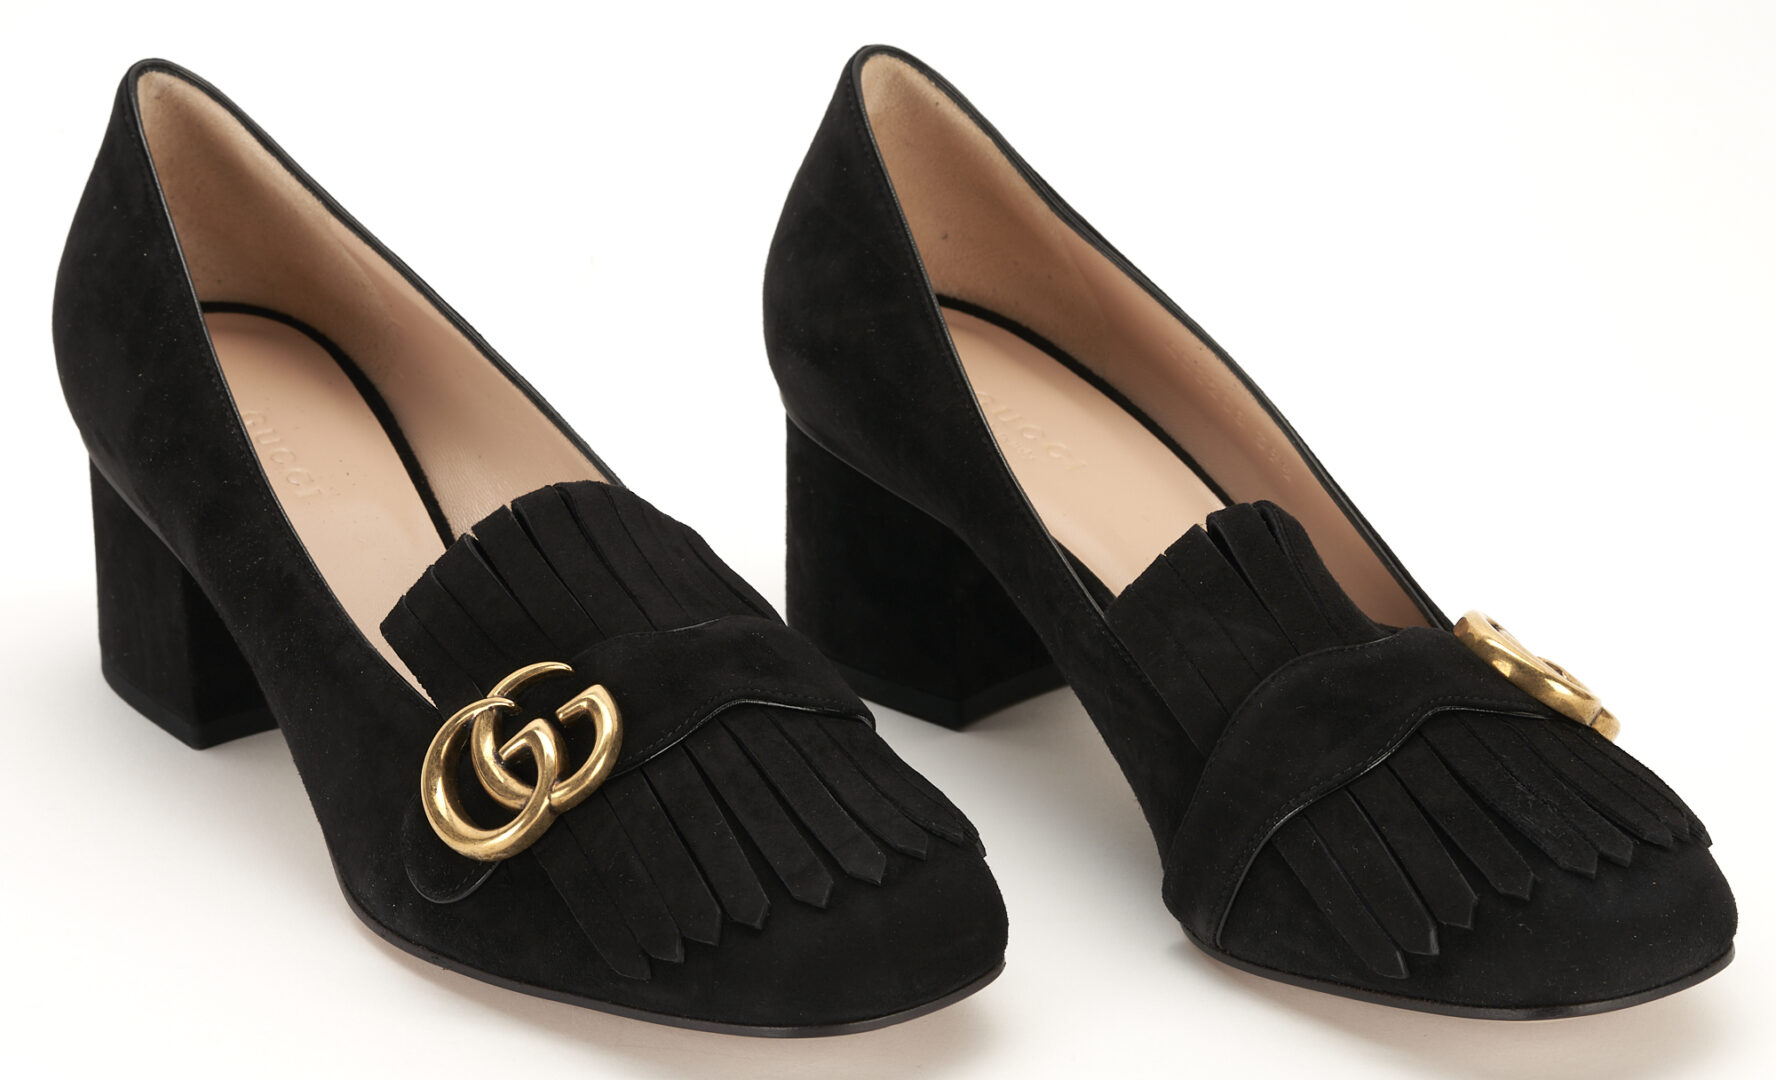 Lot 1224: 2 Prs of Gucci Loafer Style GG Pumps, incl. Suede Marmont & Supreme Python Tiger Head